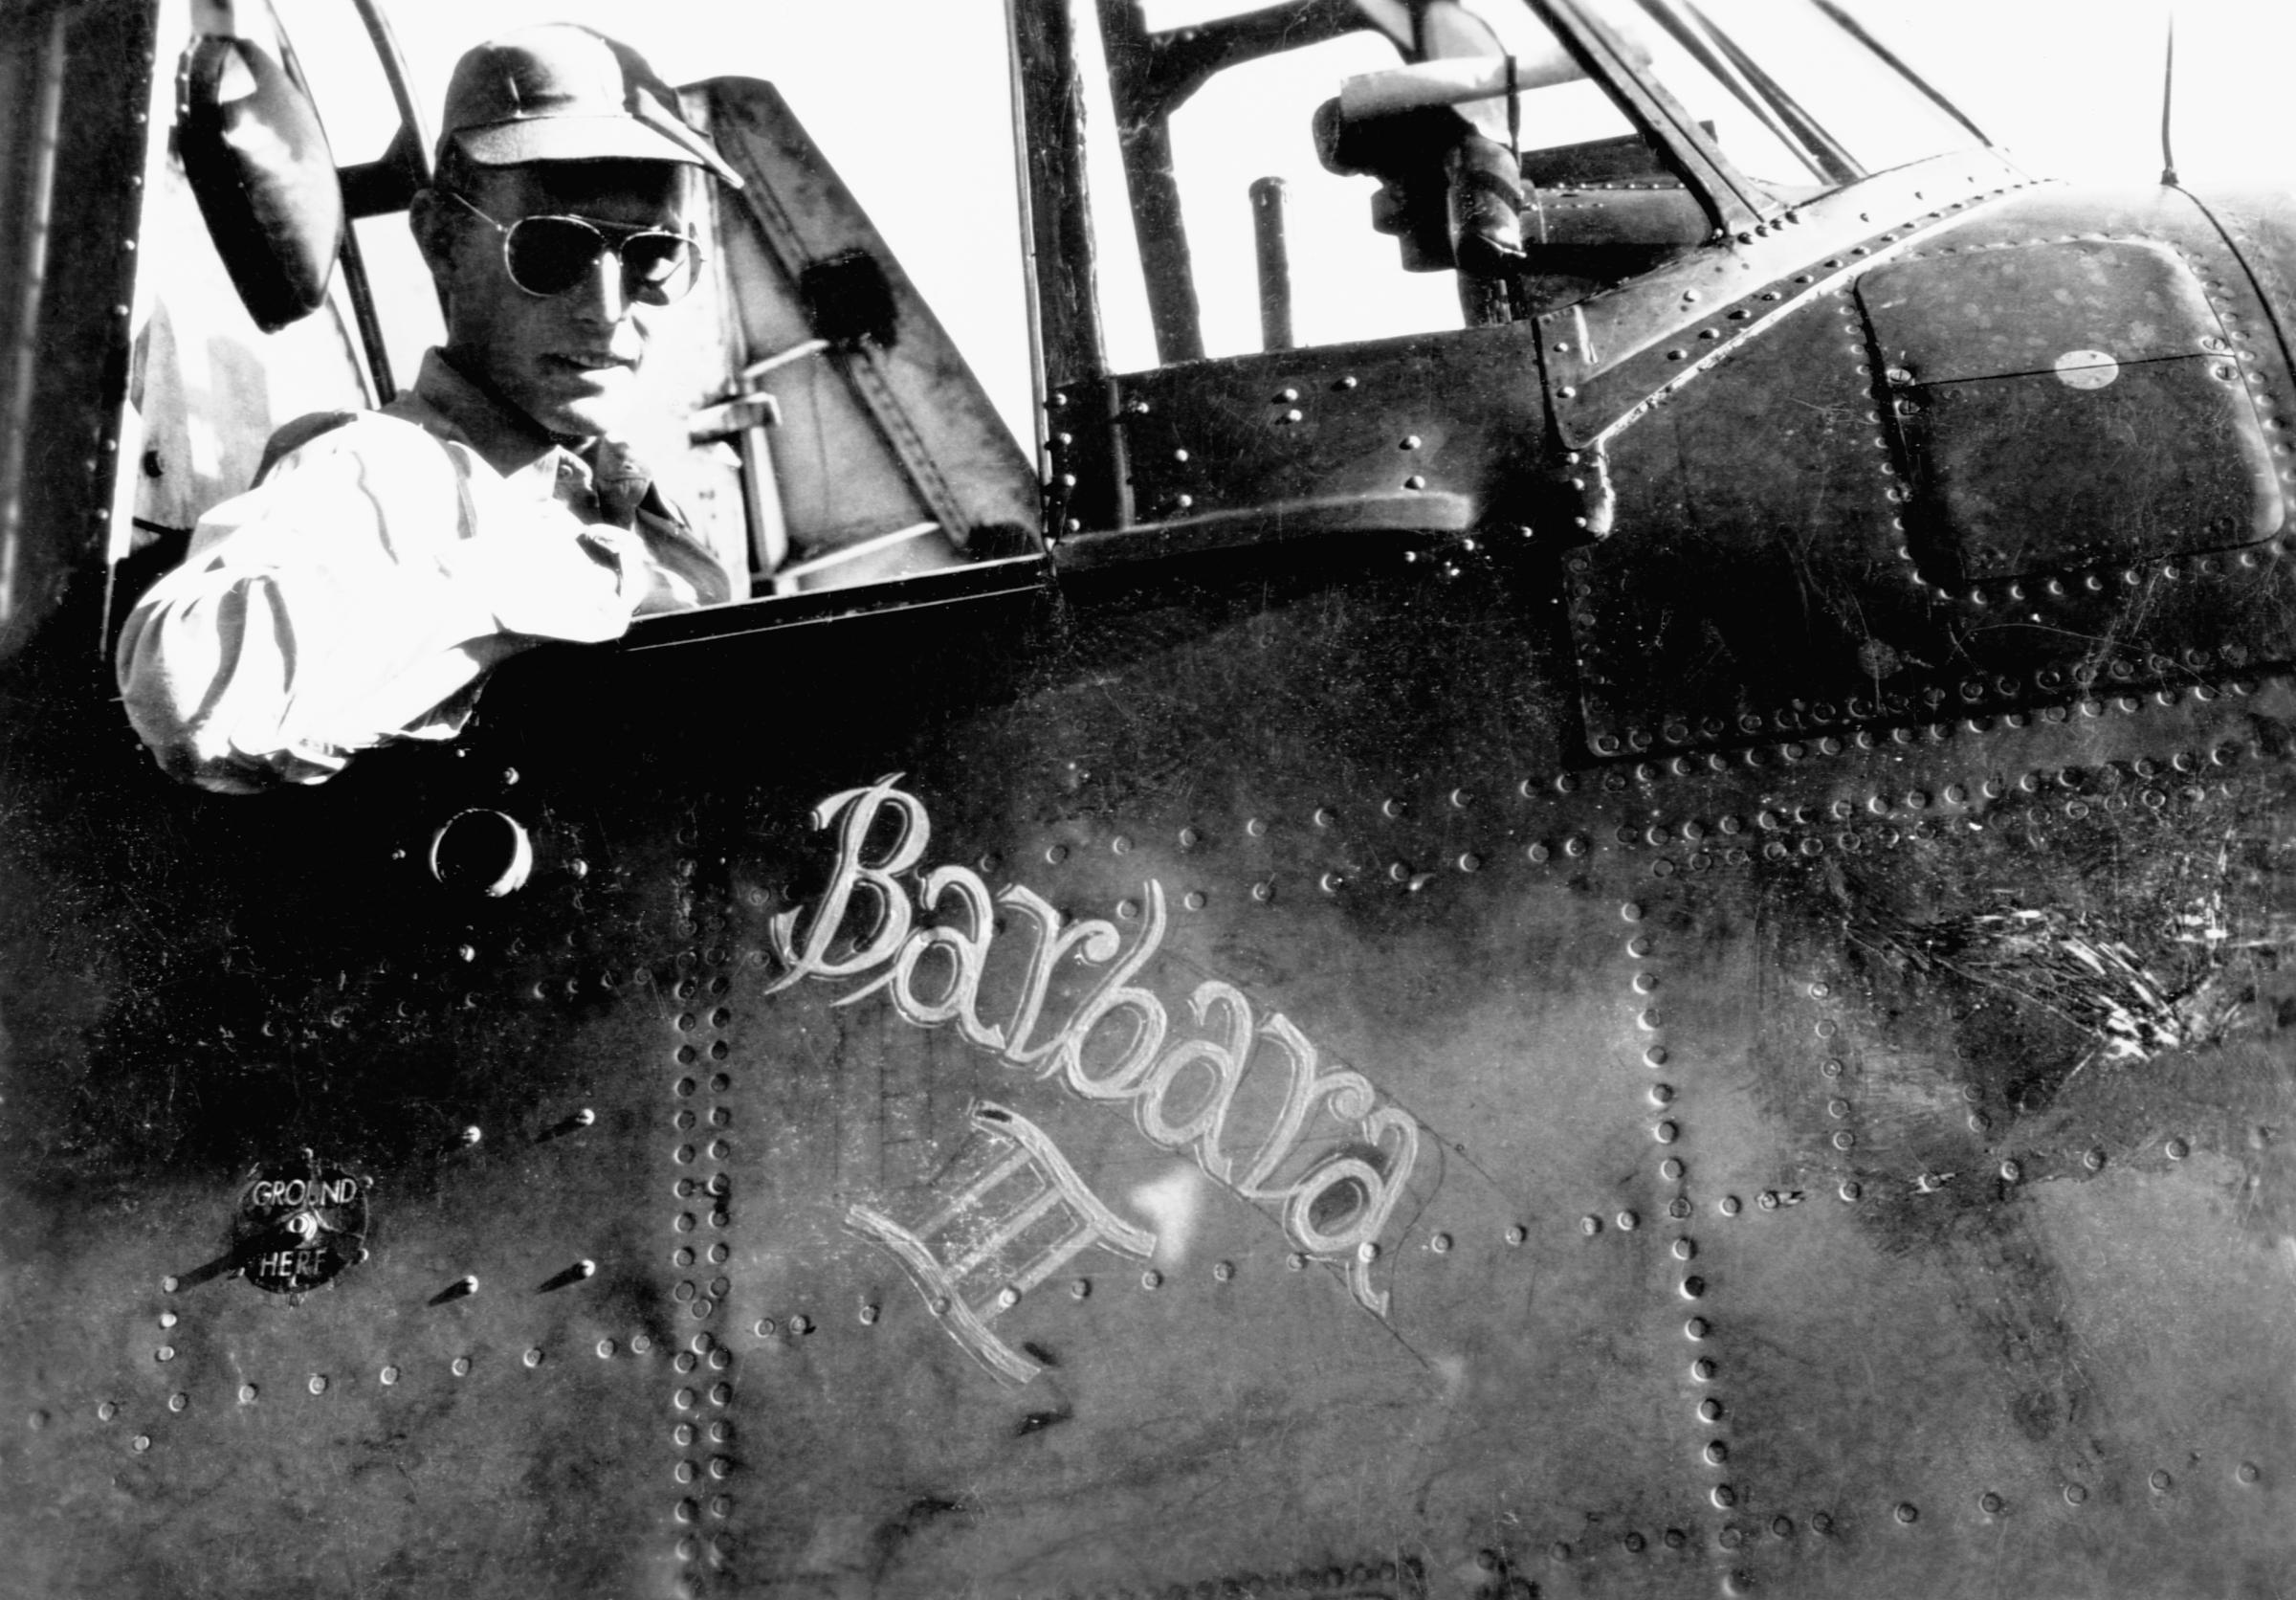 U.S. Navy pilot George H.W. Bush sits in the cockpit of his torpedo bomber "Barbara III", named after his girlfriend and future wife Barara Pierce. Bush was in the navy from 1943-1945.